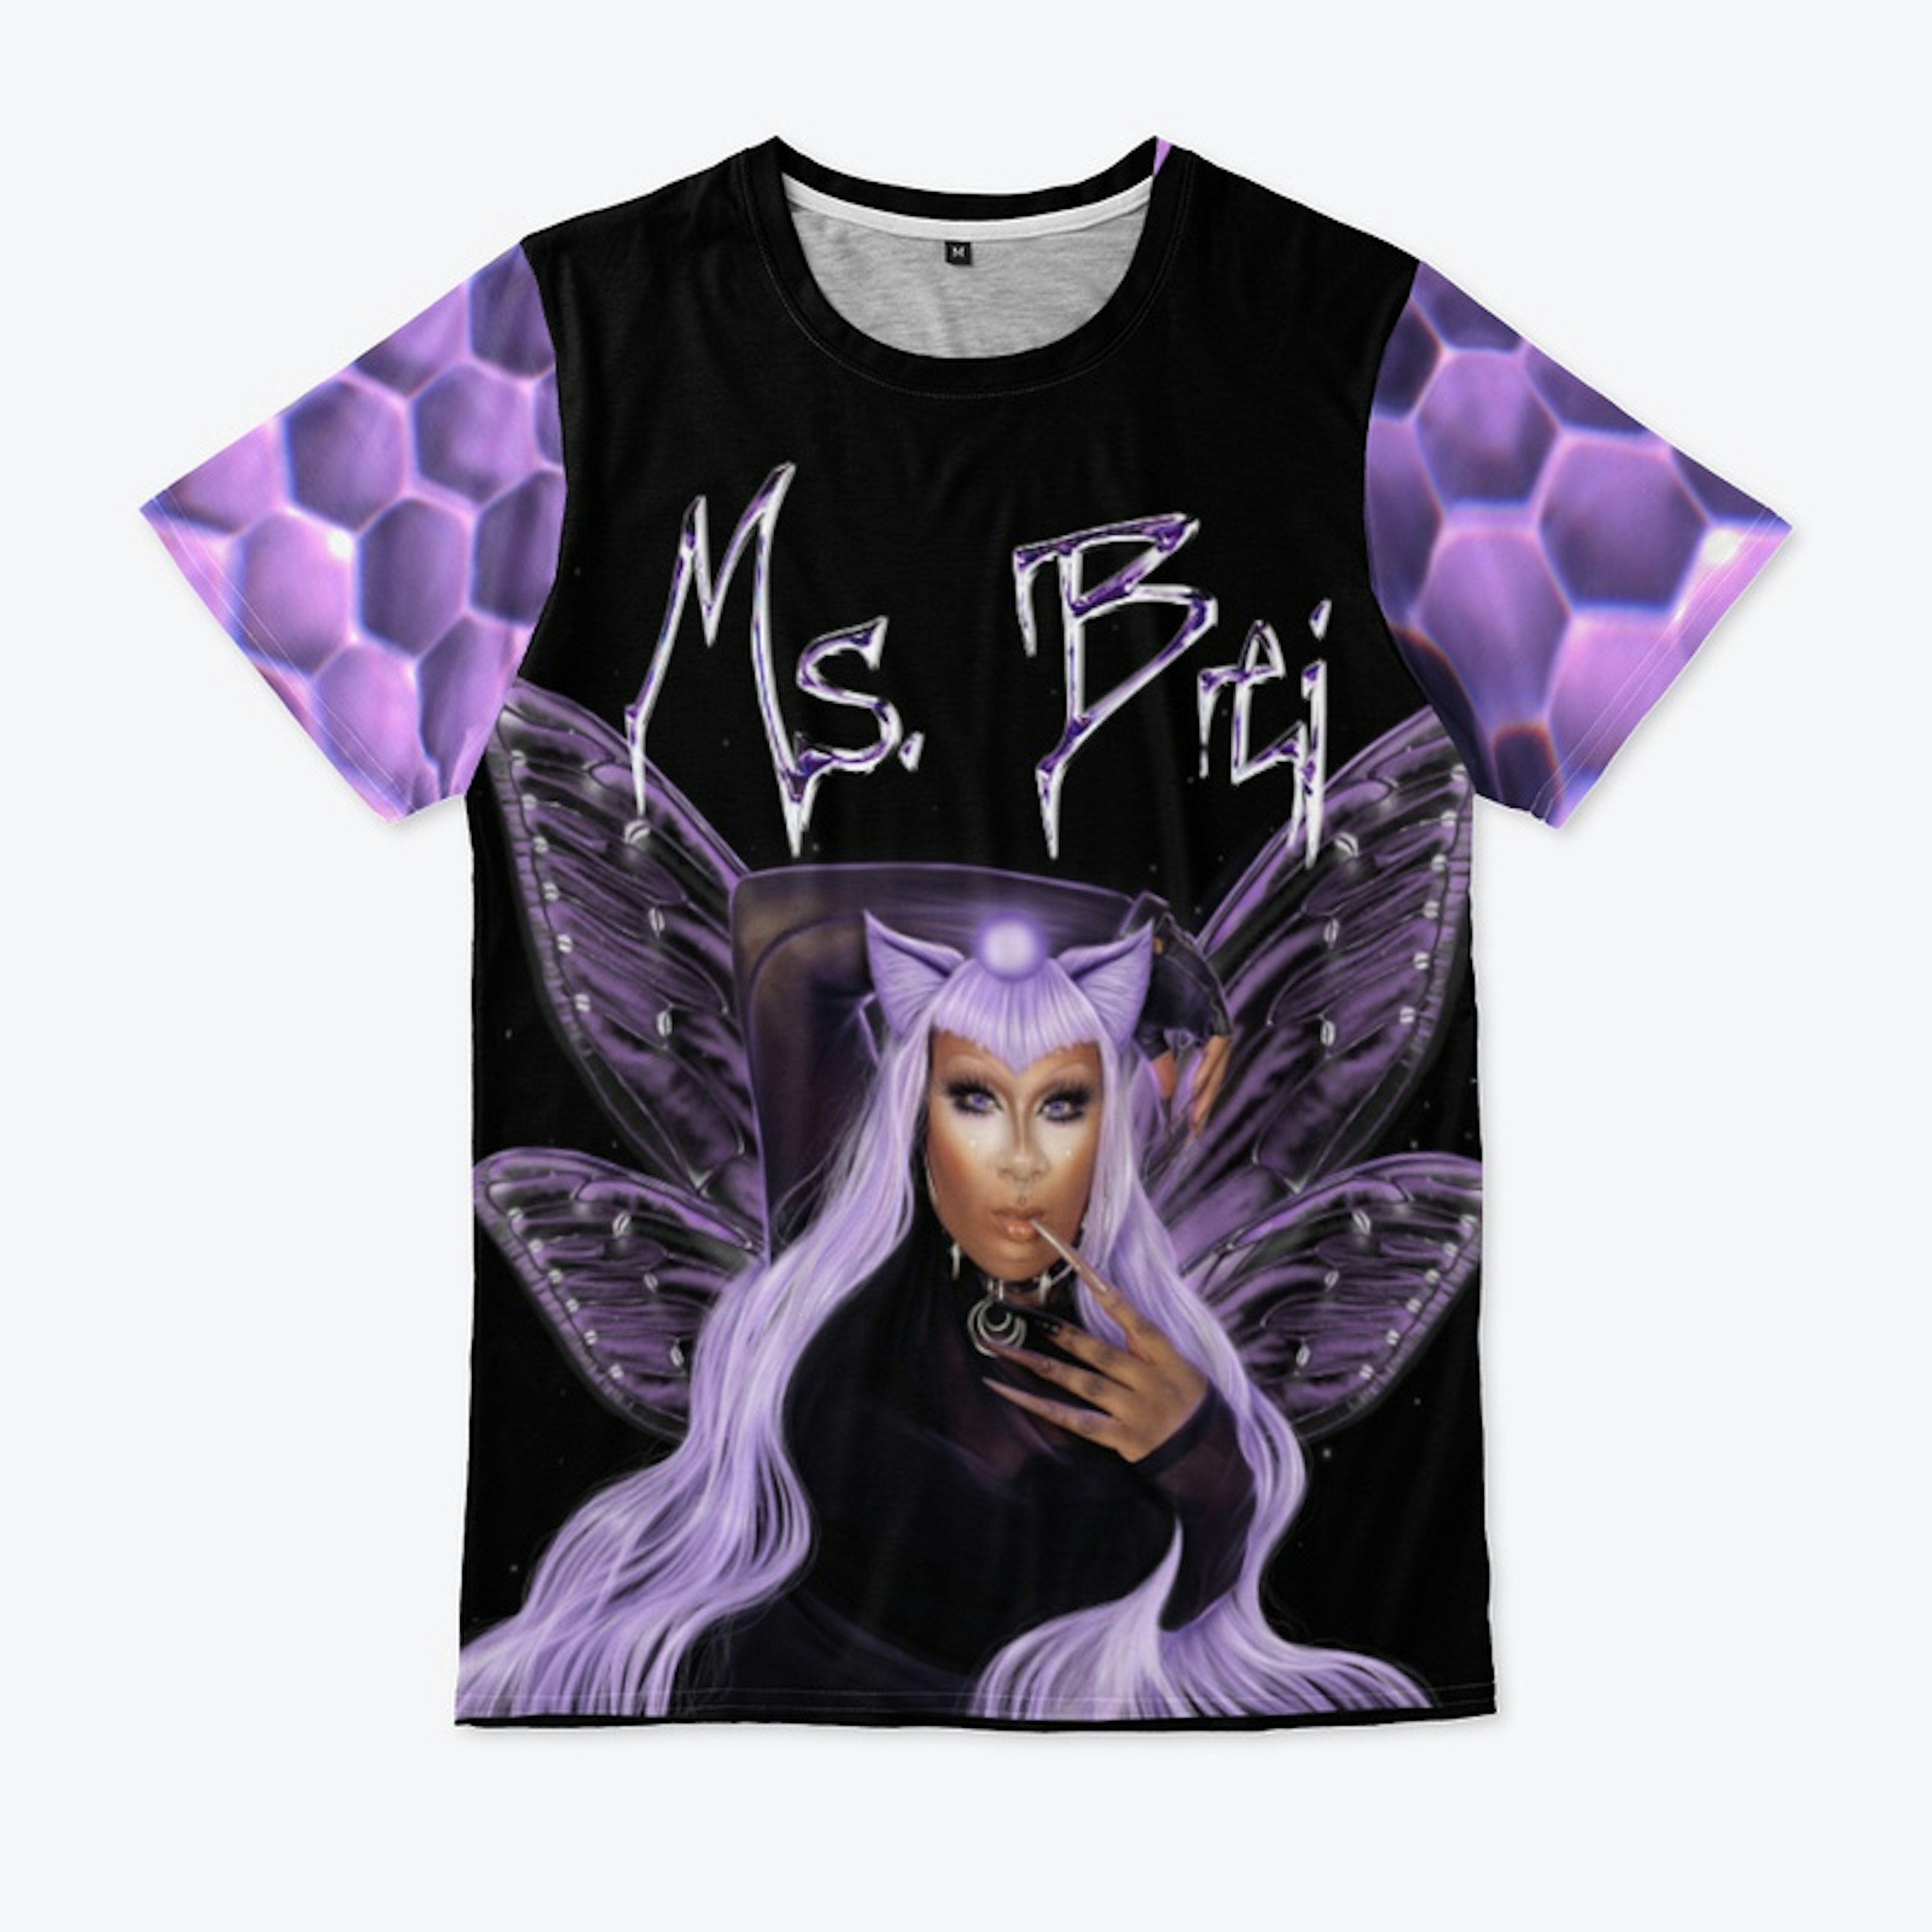 Ms. Bei (All-Over Tee)